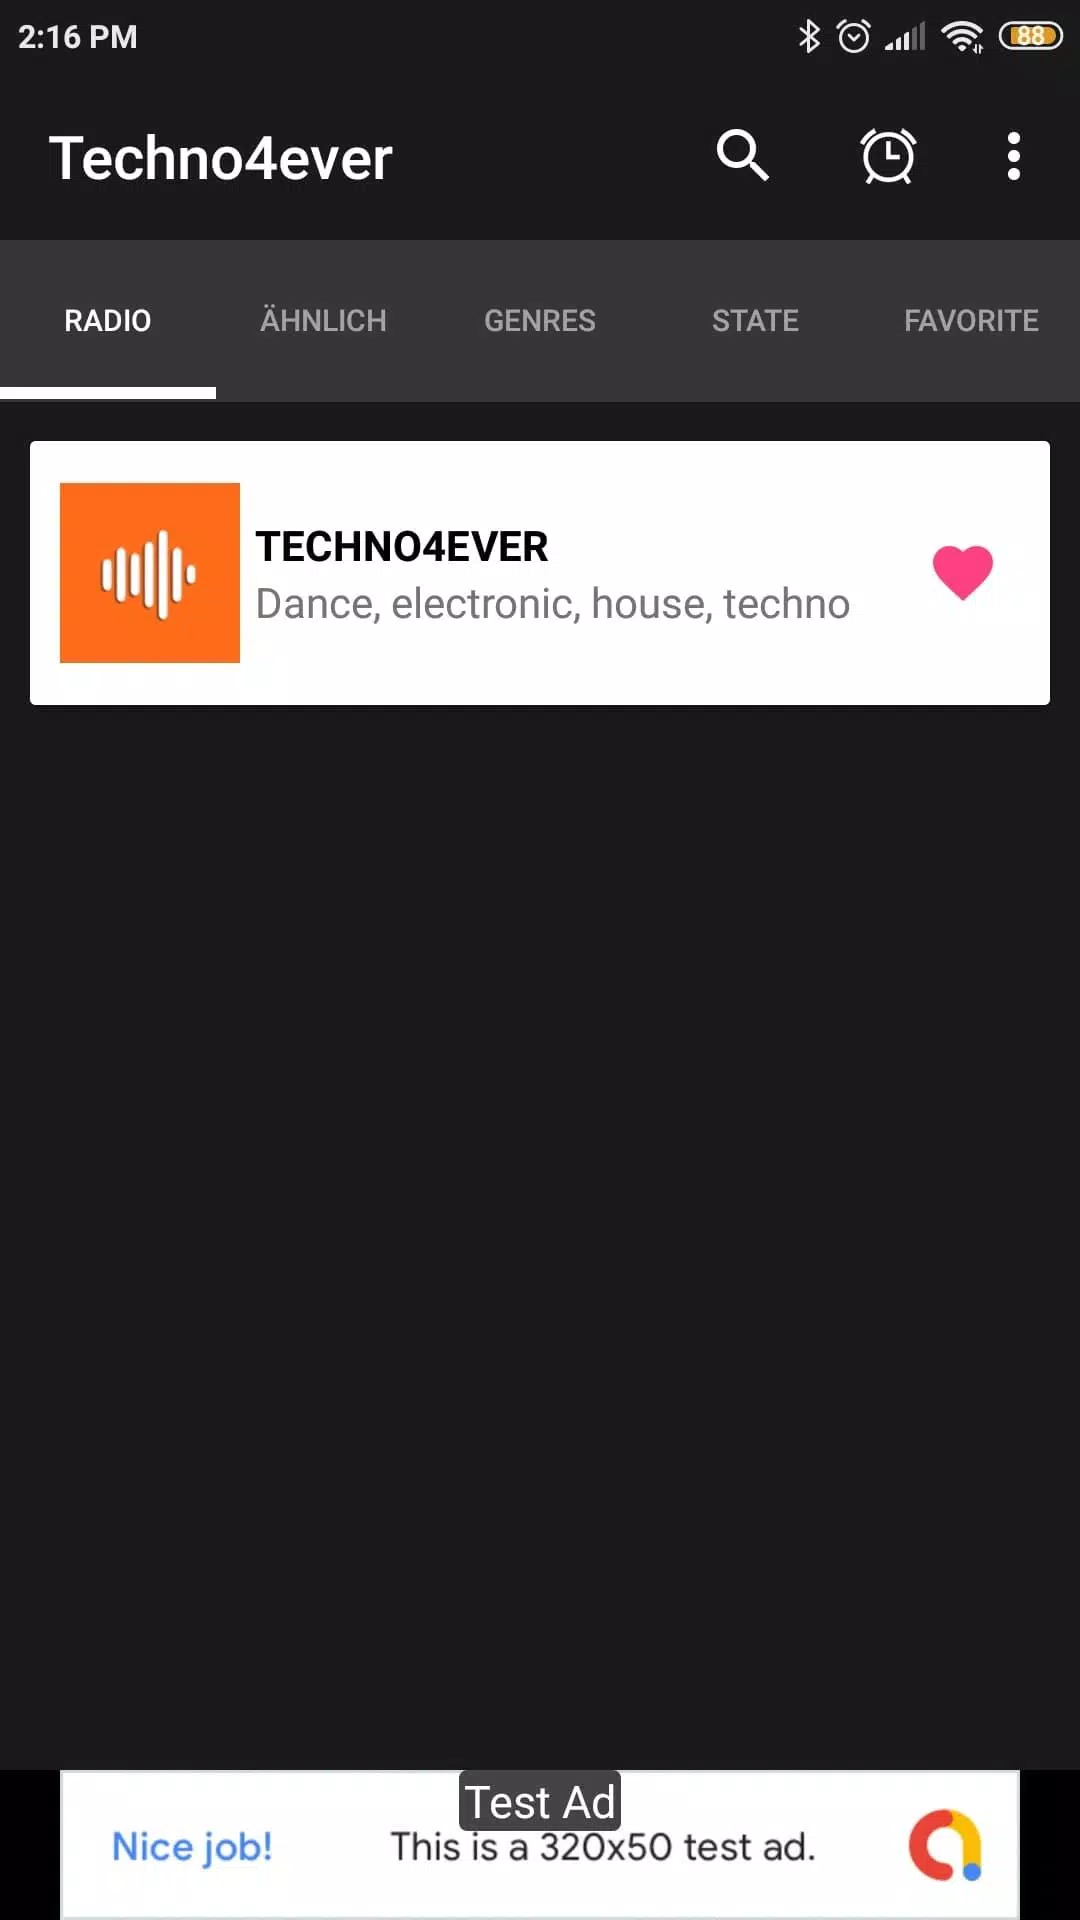 Techno4Ever App Radio FM for Android - APK Download